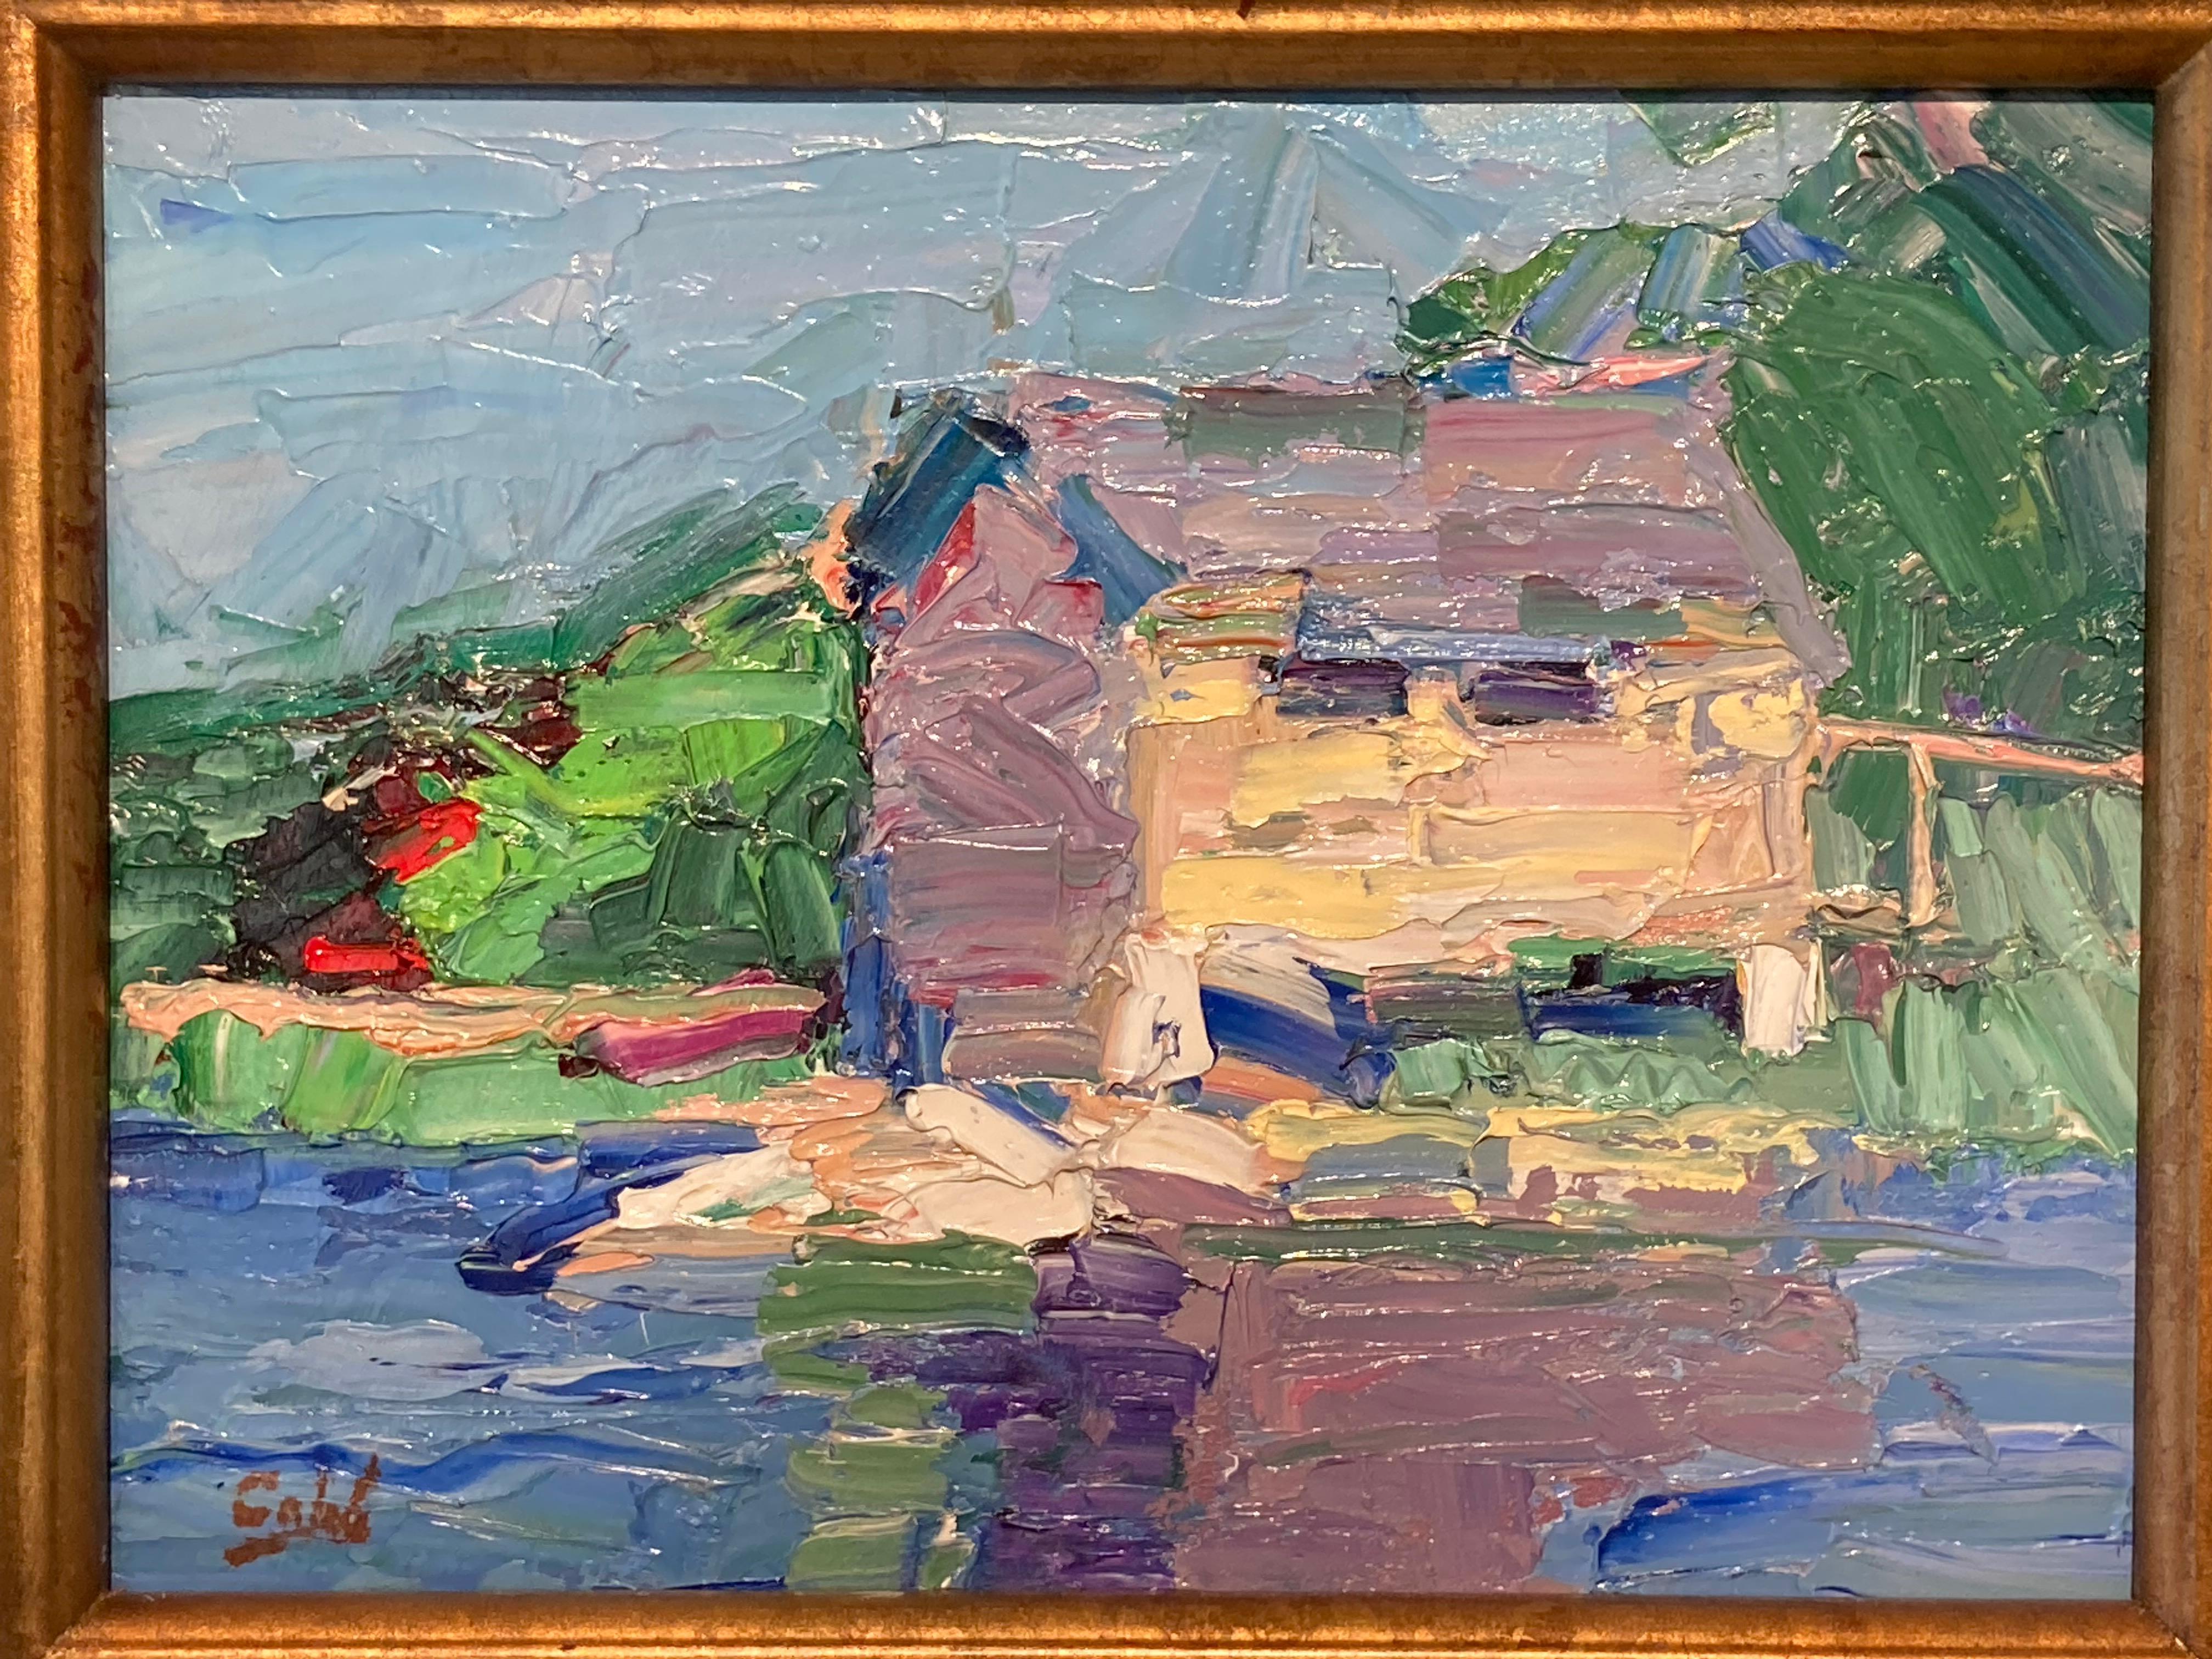 This oil on masonite painting by James Cobb features a stand-alone home on the edge of a waterway. The house's reflection melts into the water where the colors of blue, gray, and purple blend together. In the background a light blue sky hides behind